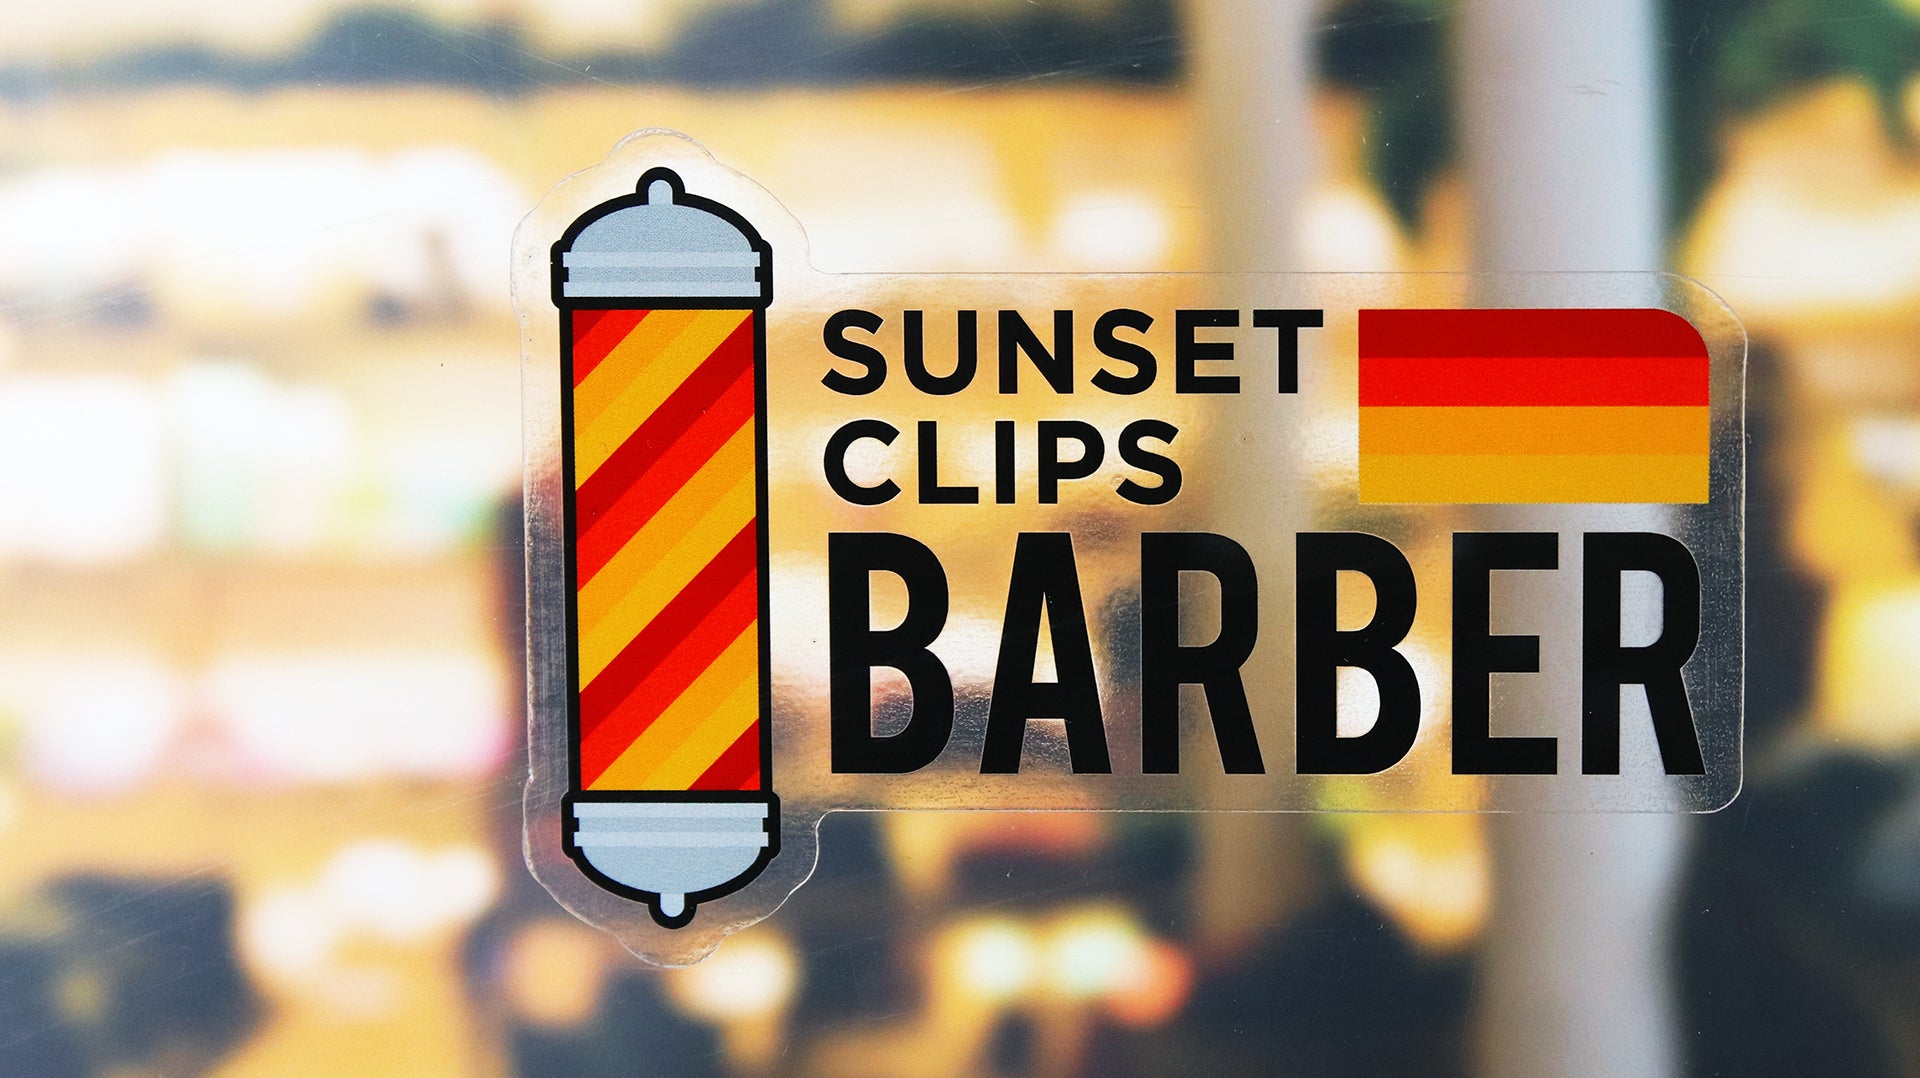 https://stickerit.co/cdn/shop/products/eco-friendly-front-adhesive-die-cut-sticker-with-sunset-clips-barber-logo-applied-to-a-window.jpg?v=1681921302&width=1920